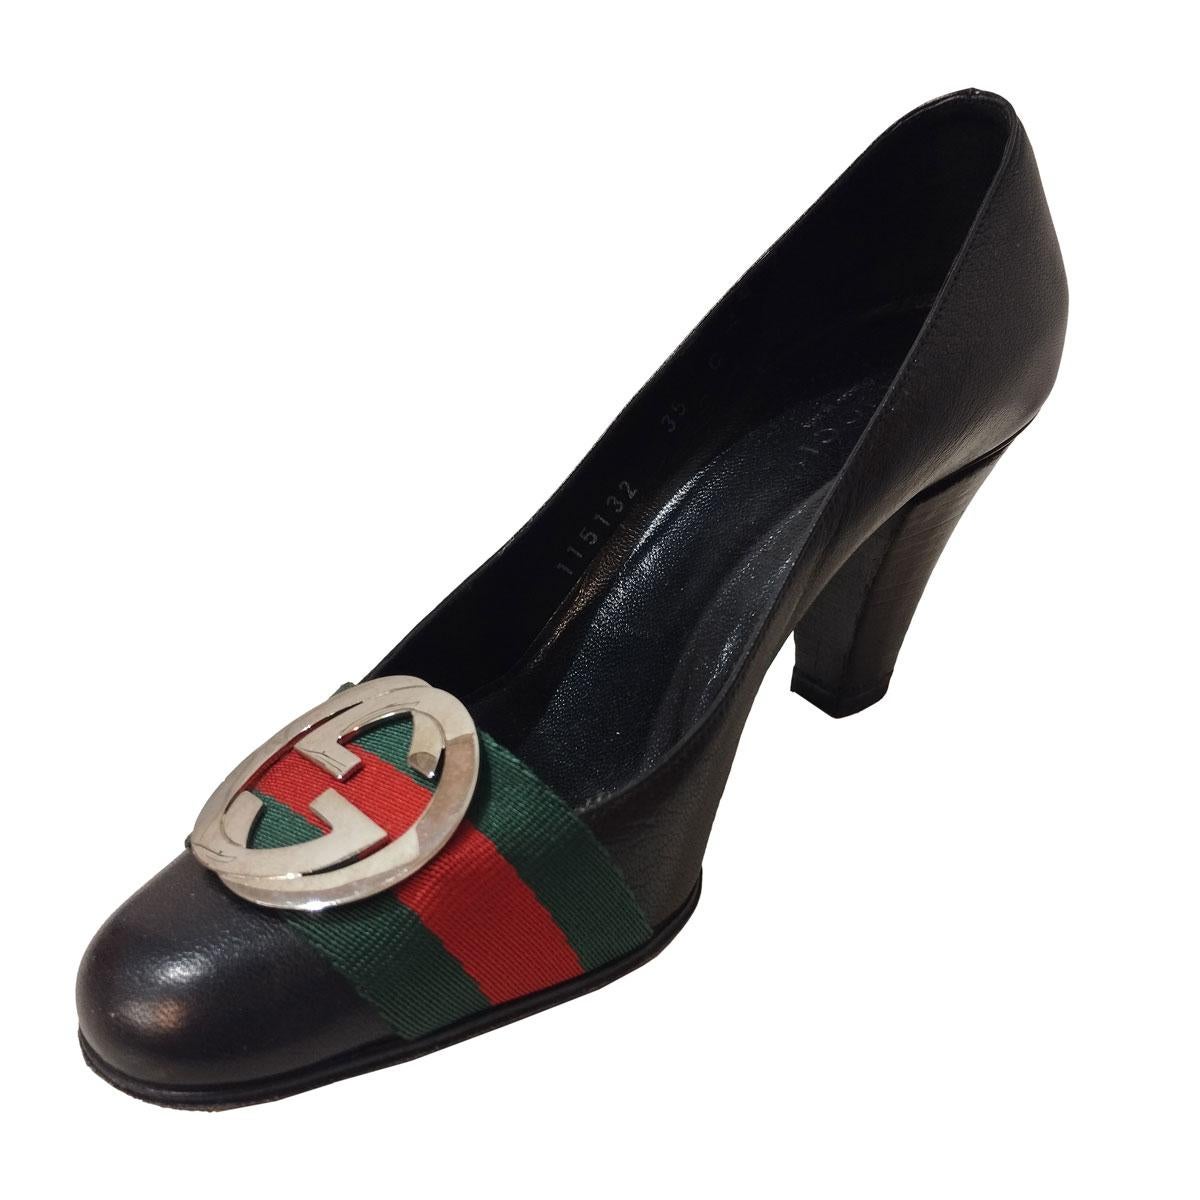 Leather décolleté
Leather
Black color
GG metal buckle
Red and green band
Heel height cm 7 (2,75 inches)